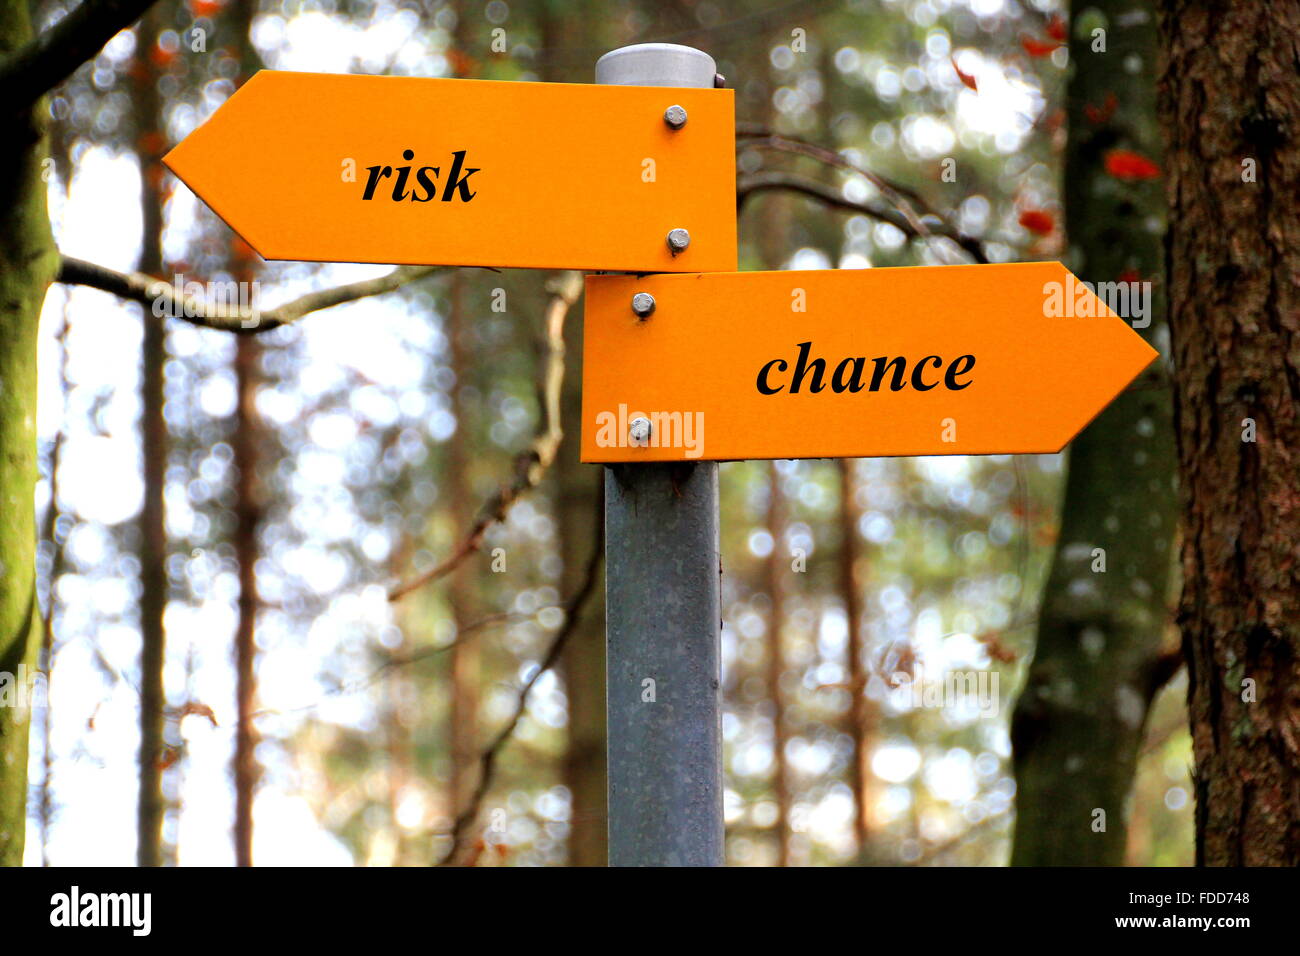 risk and chance written on a yellow direction sign Stock Photo